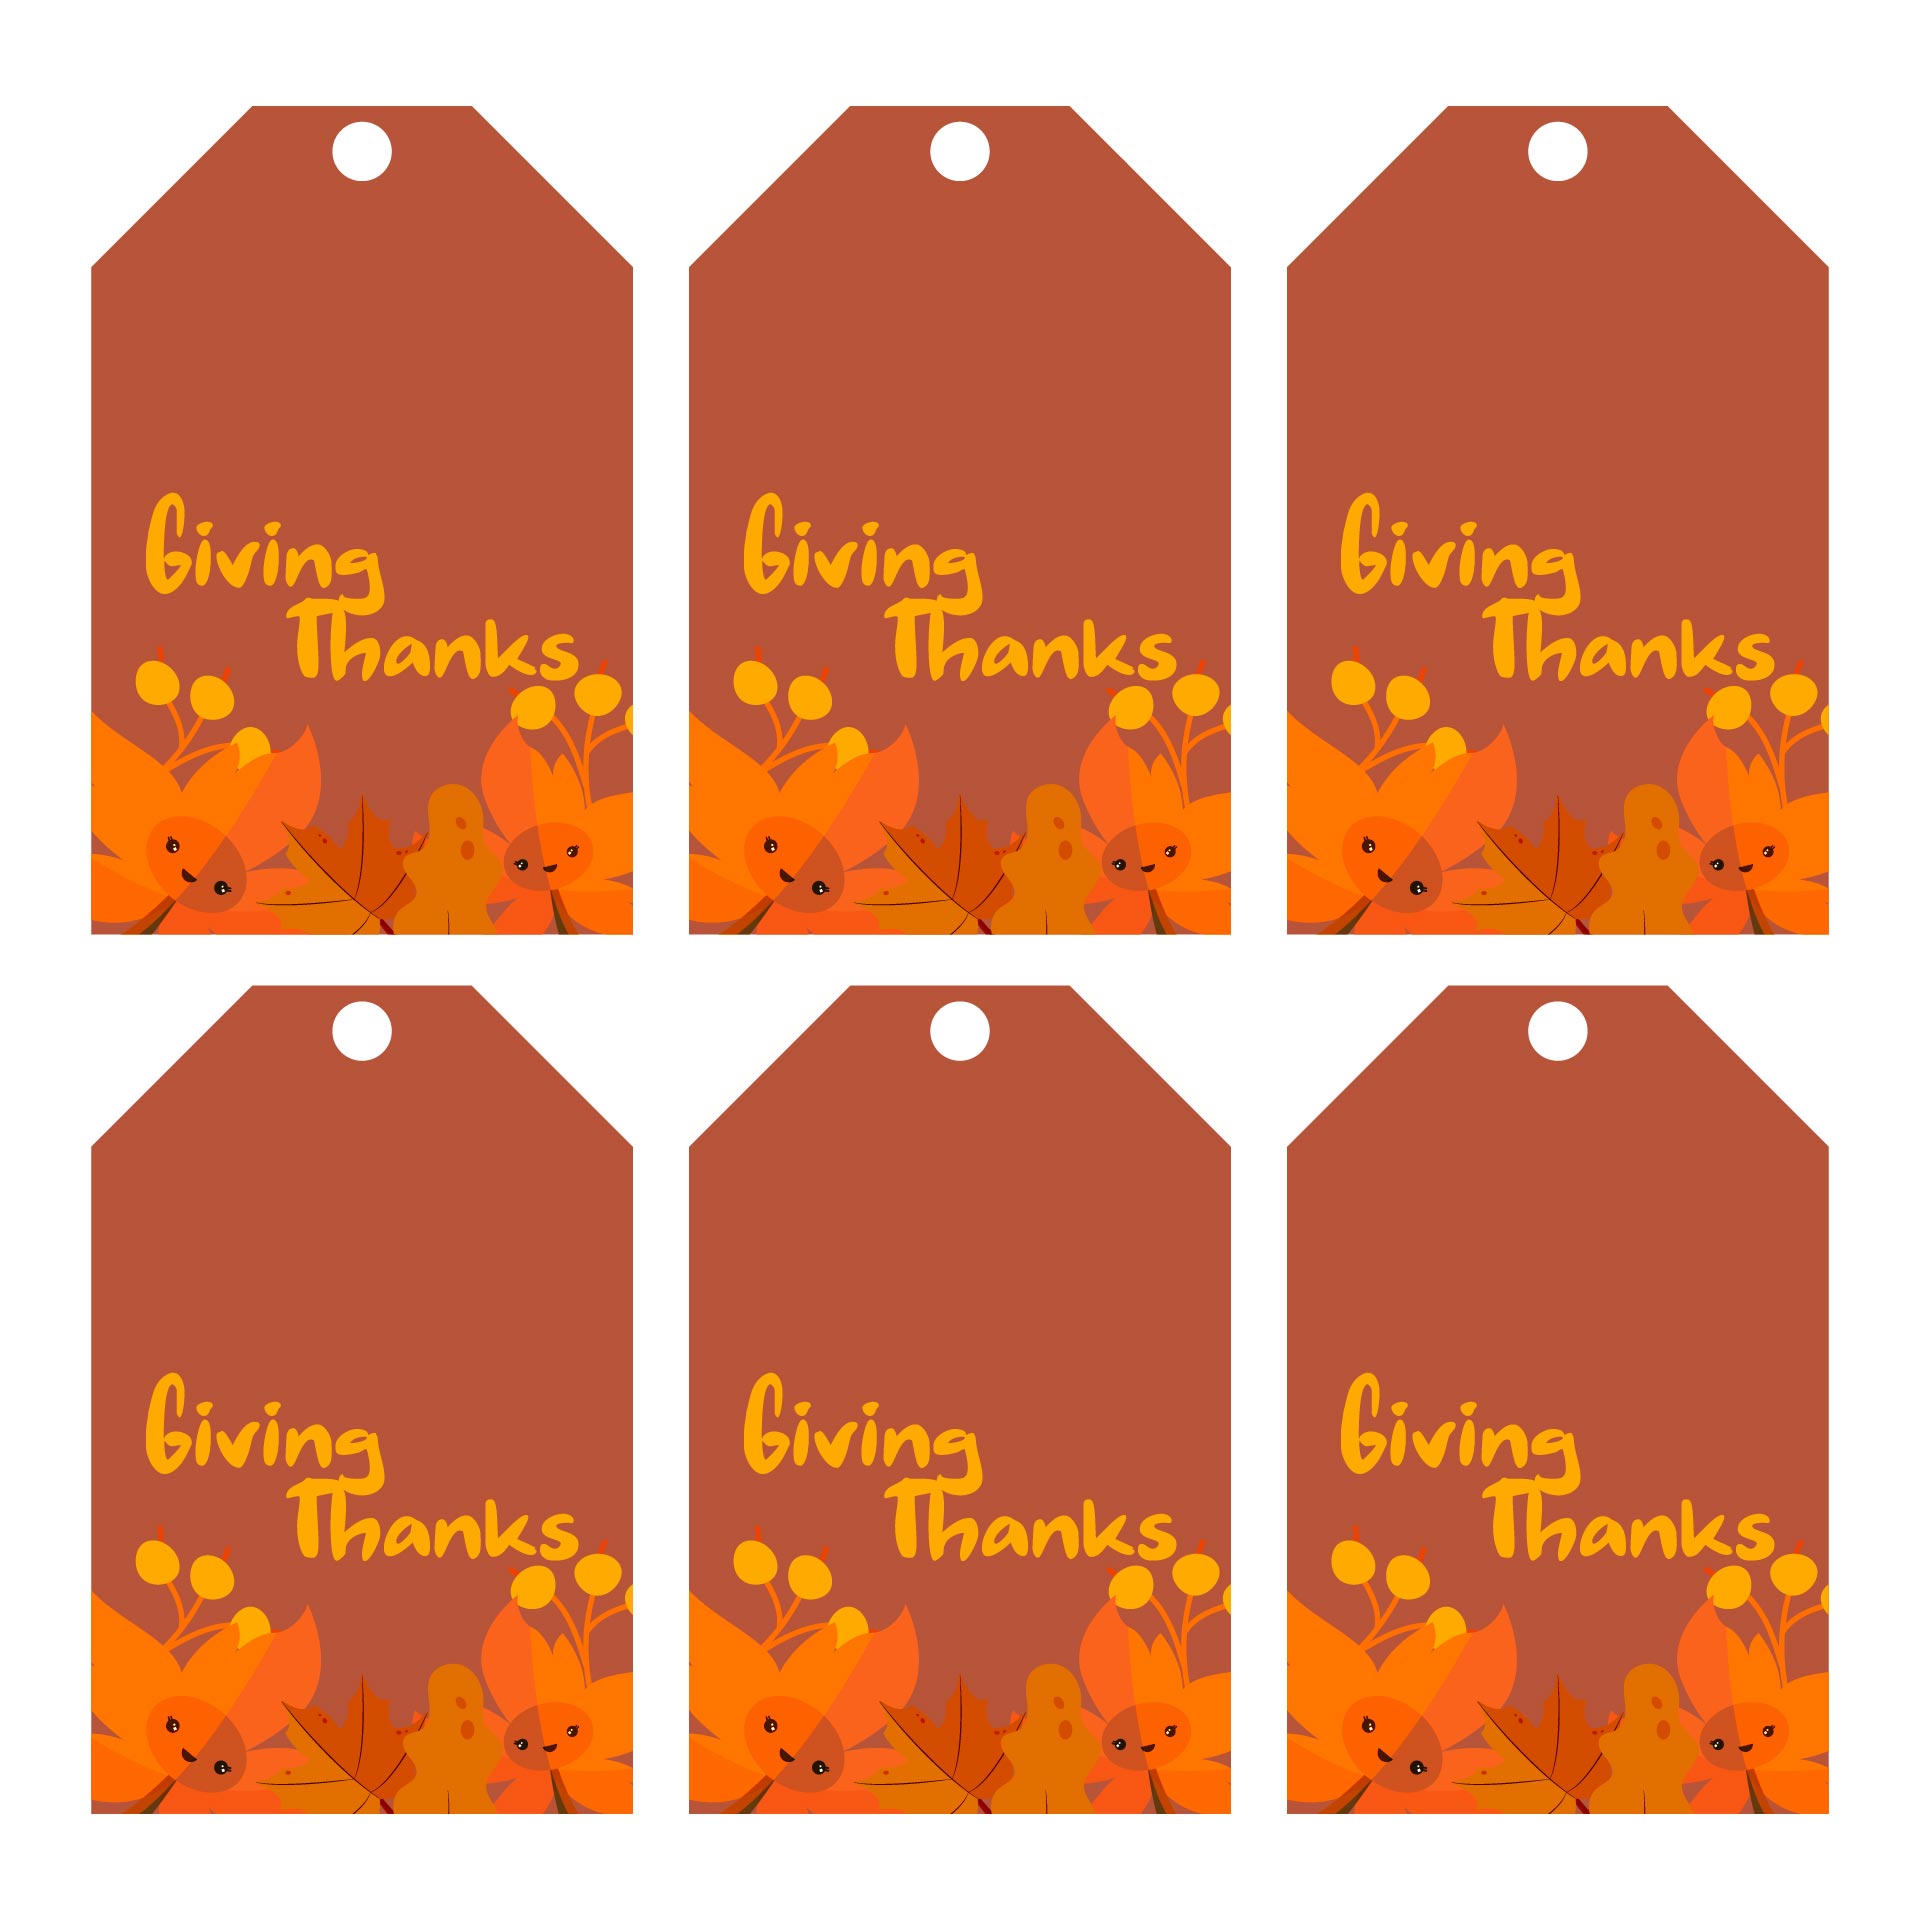 Thanksgiving Day Vintage Gift Tags And Cards With Calligraphy